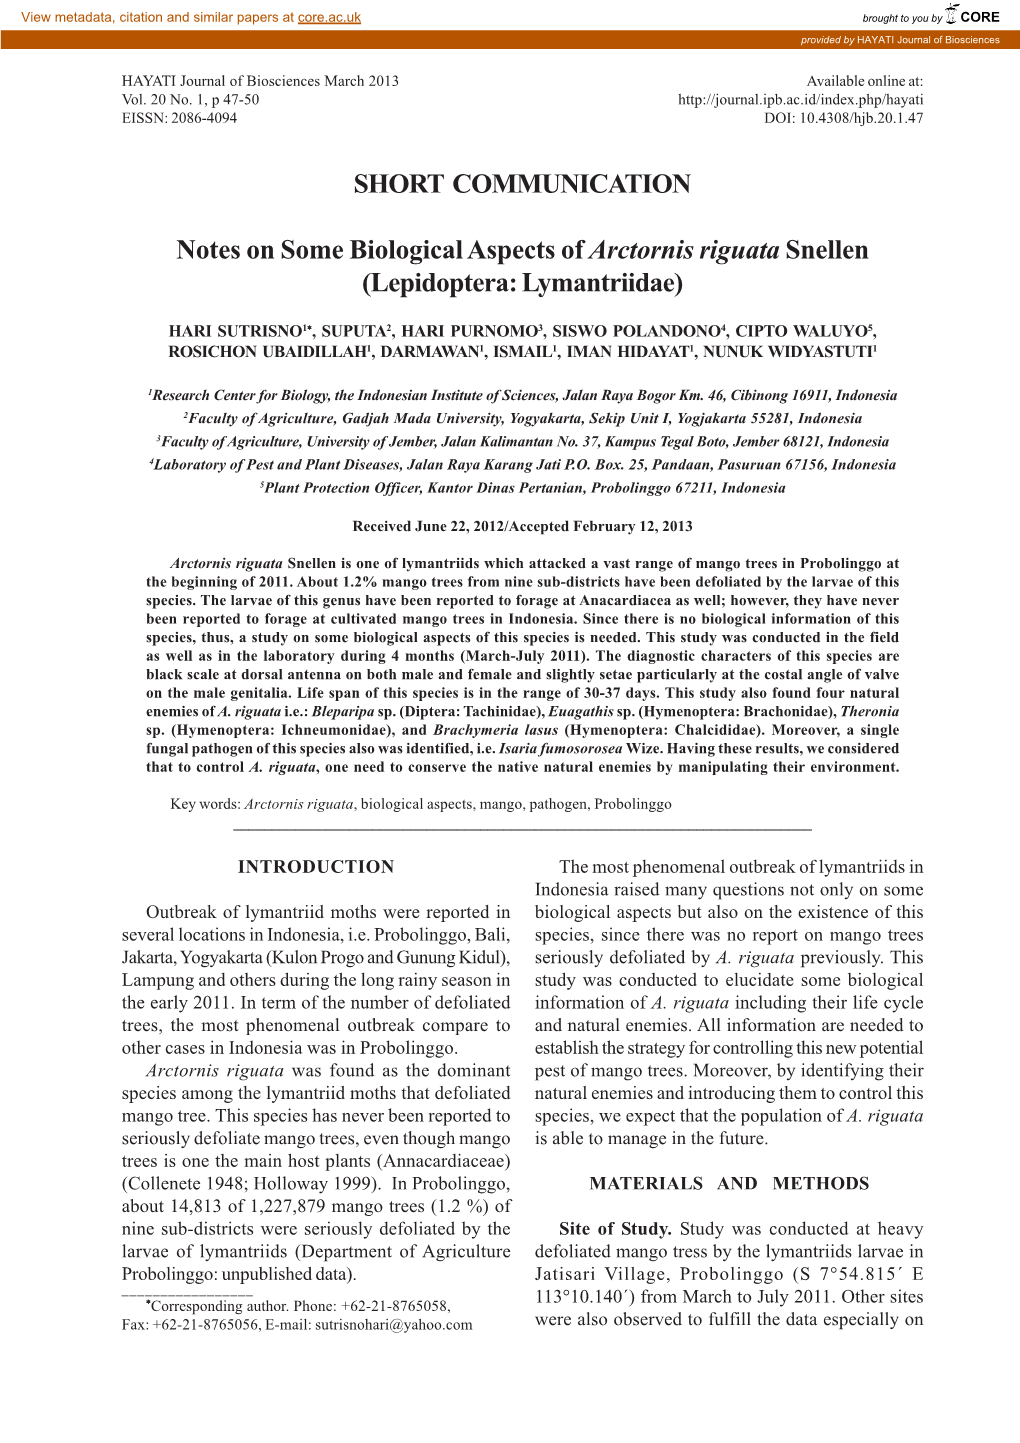 SHORT COMMUNICATION Notes on Some Biological Aspects Of